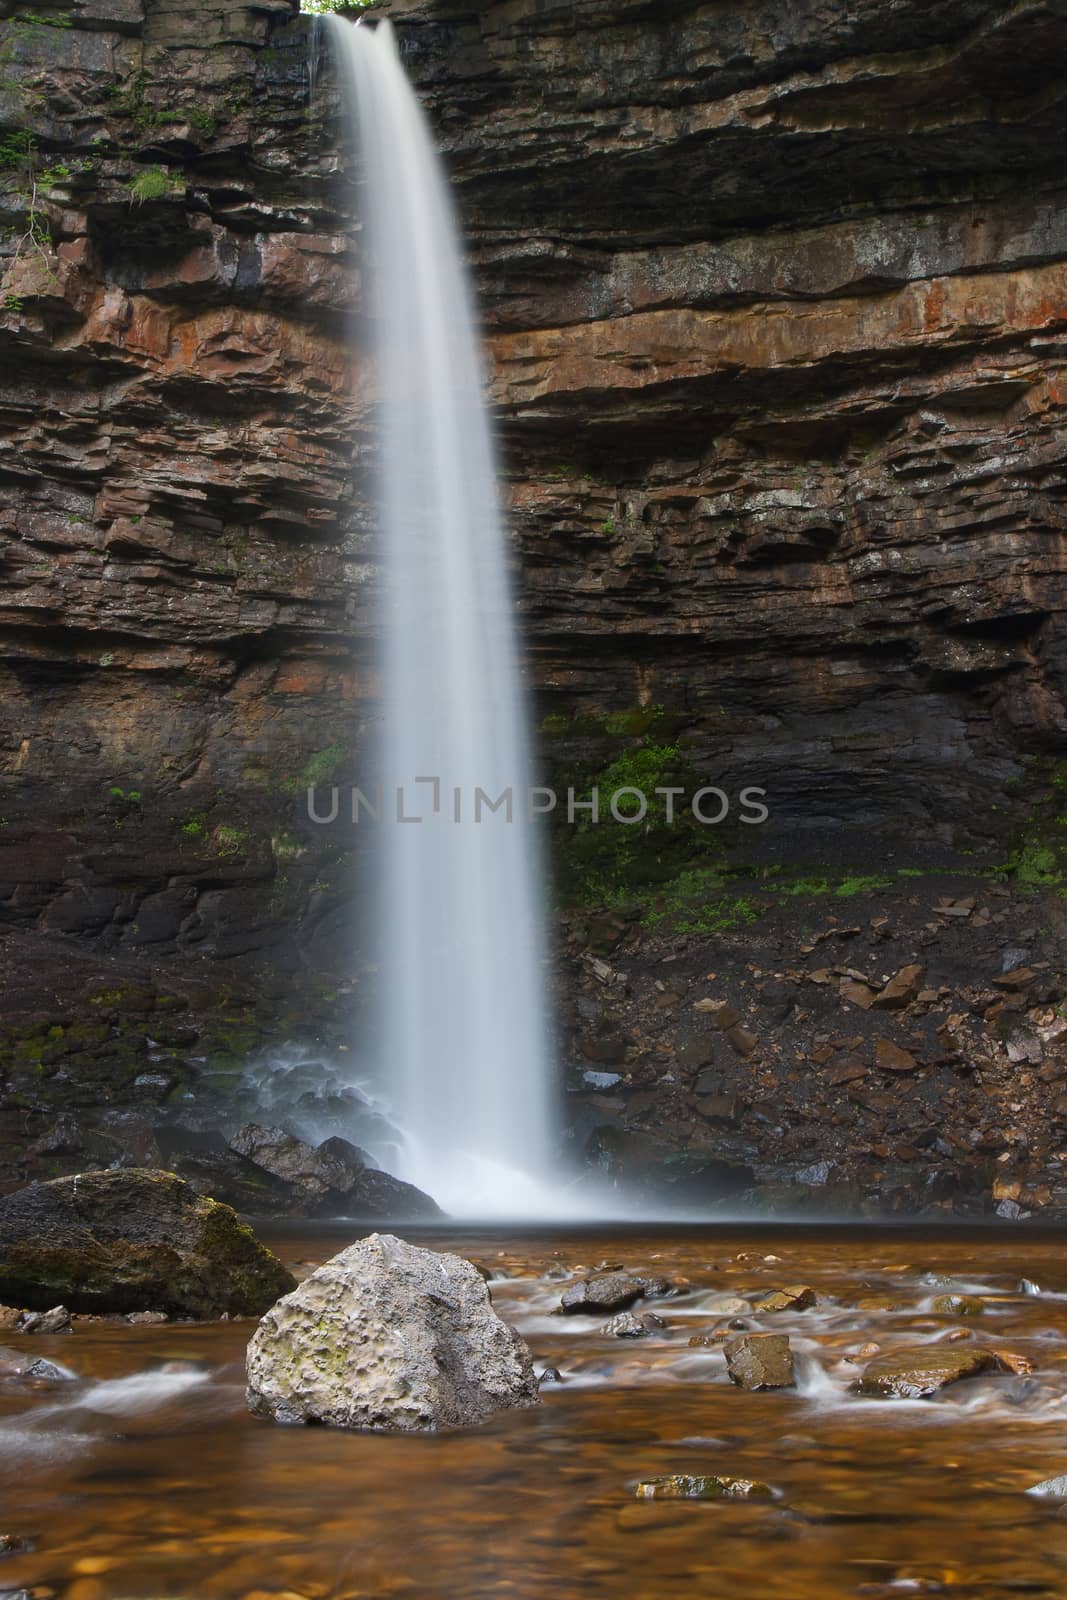 Hardraw Force is England`s largest single drop waterfall, a reputed 100 foot drop.